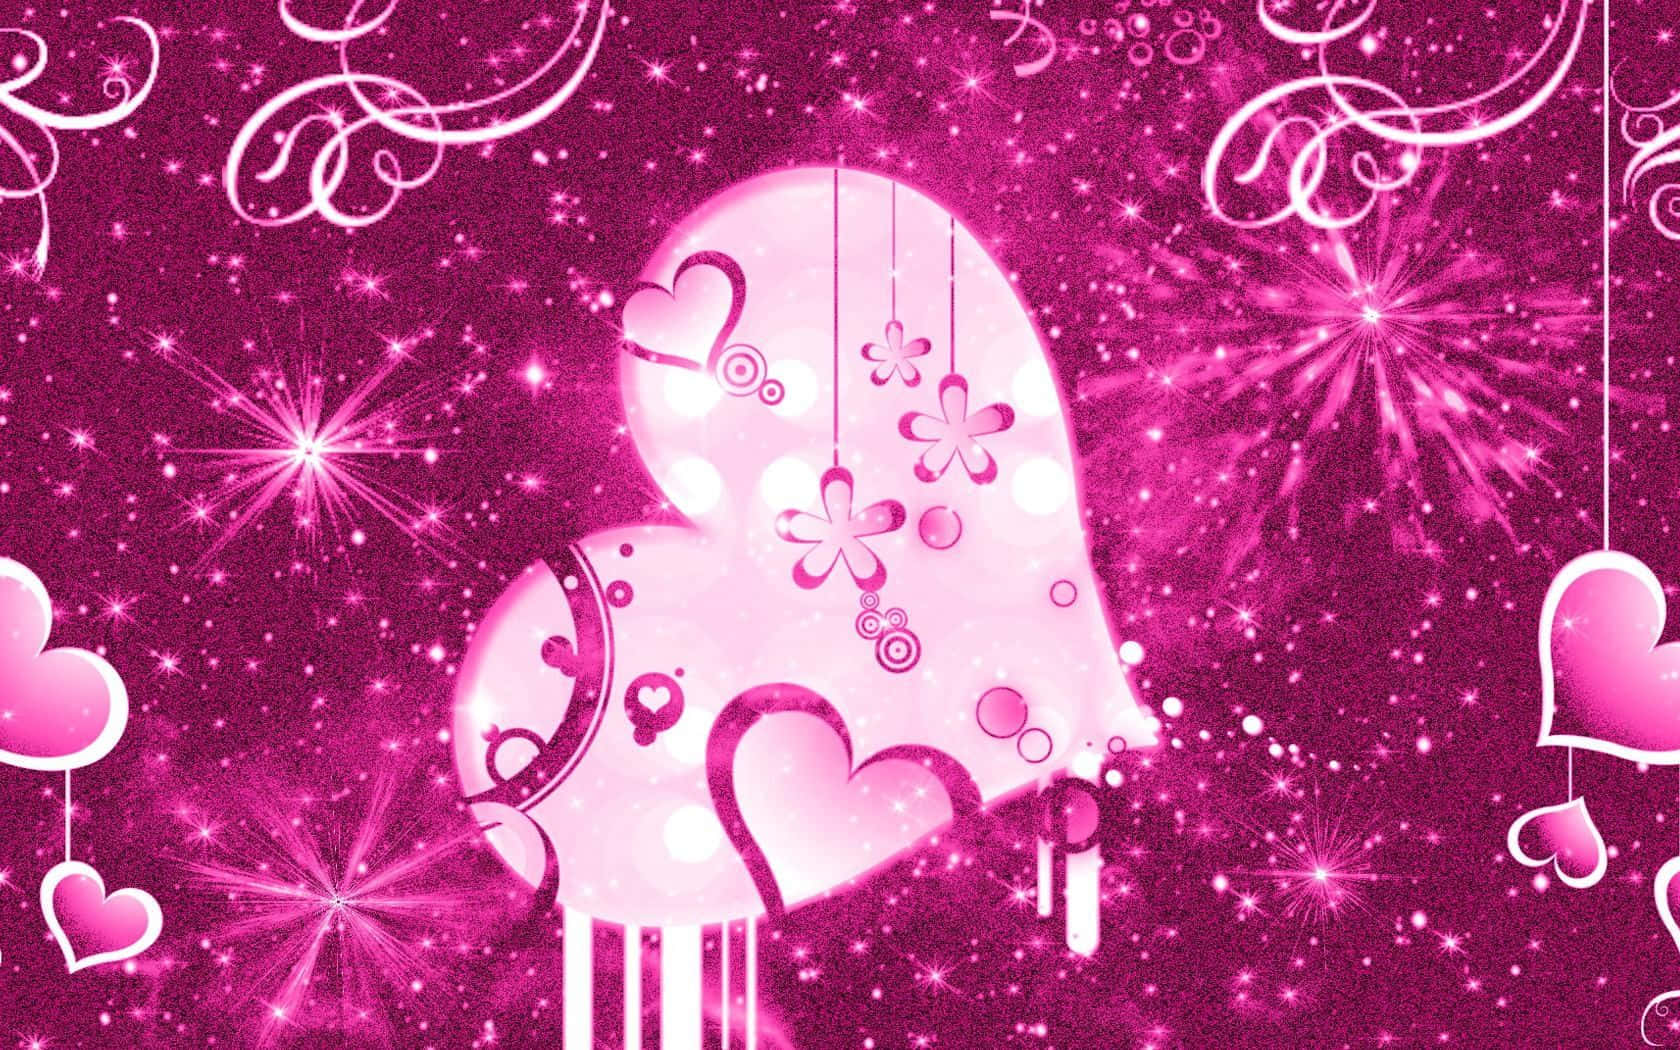 Celebrate the season with a Girly Xmas! Wallpaper